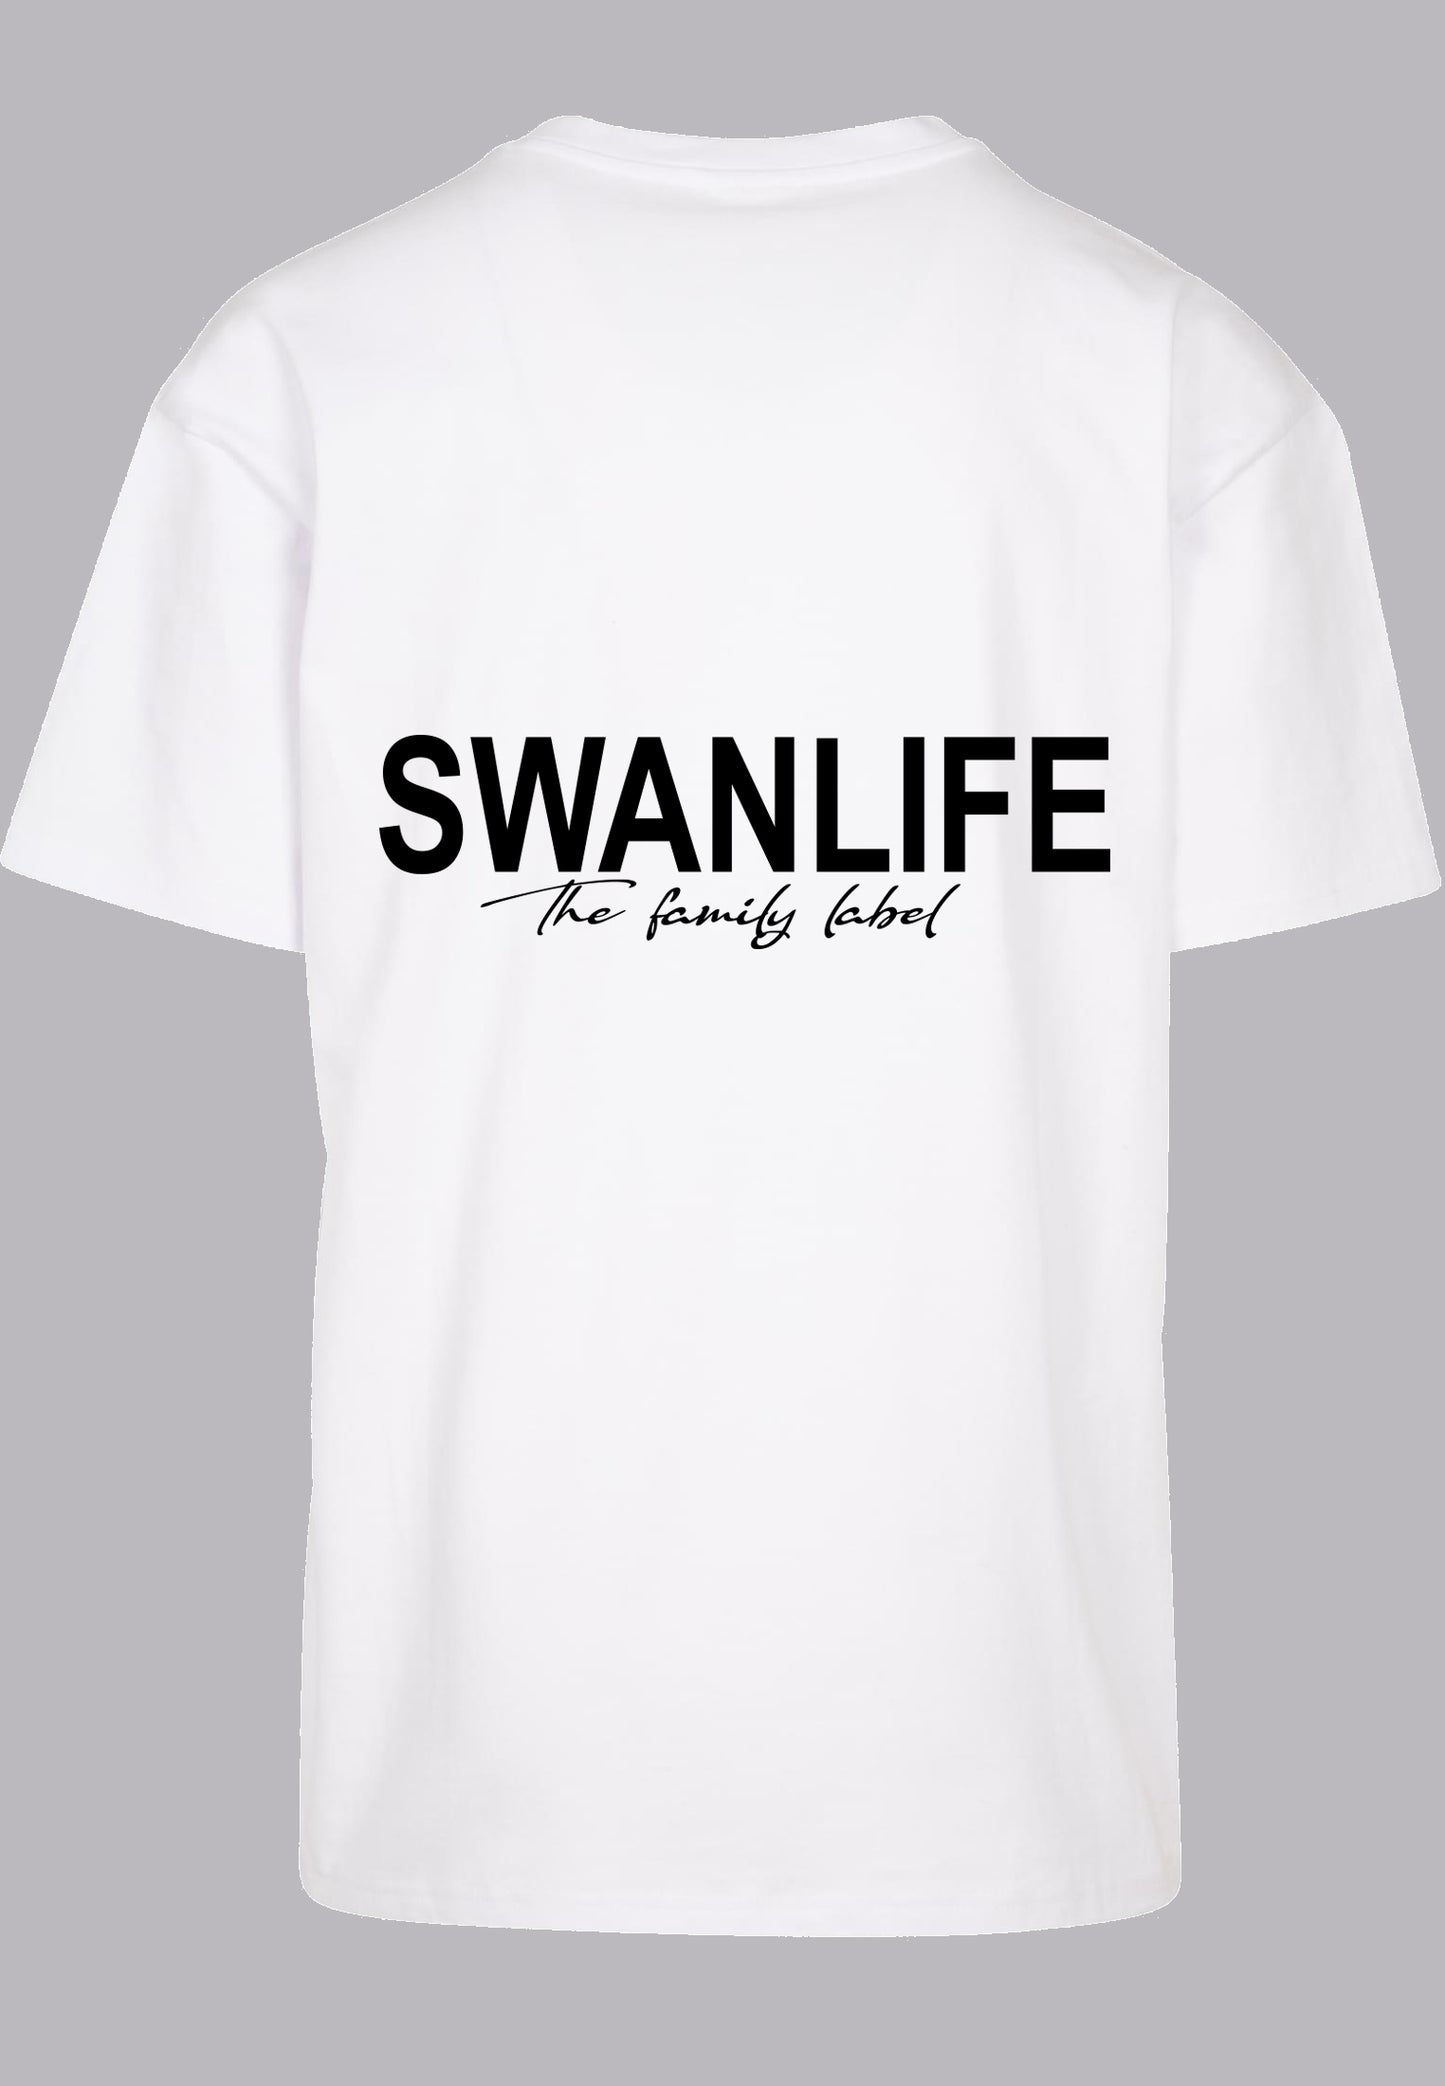 Swanlife Oversized Tee 'The Family Label' - White/Black - Swanlife Fashion